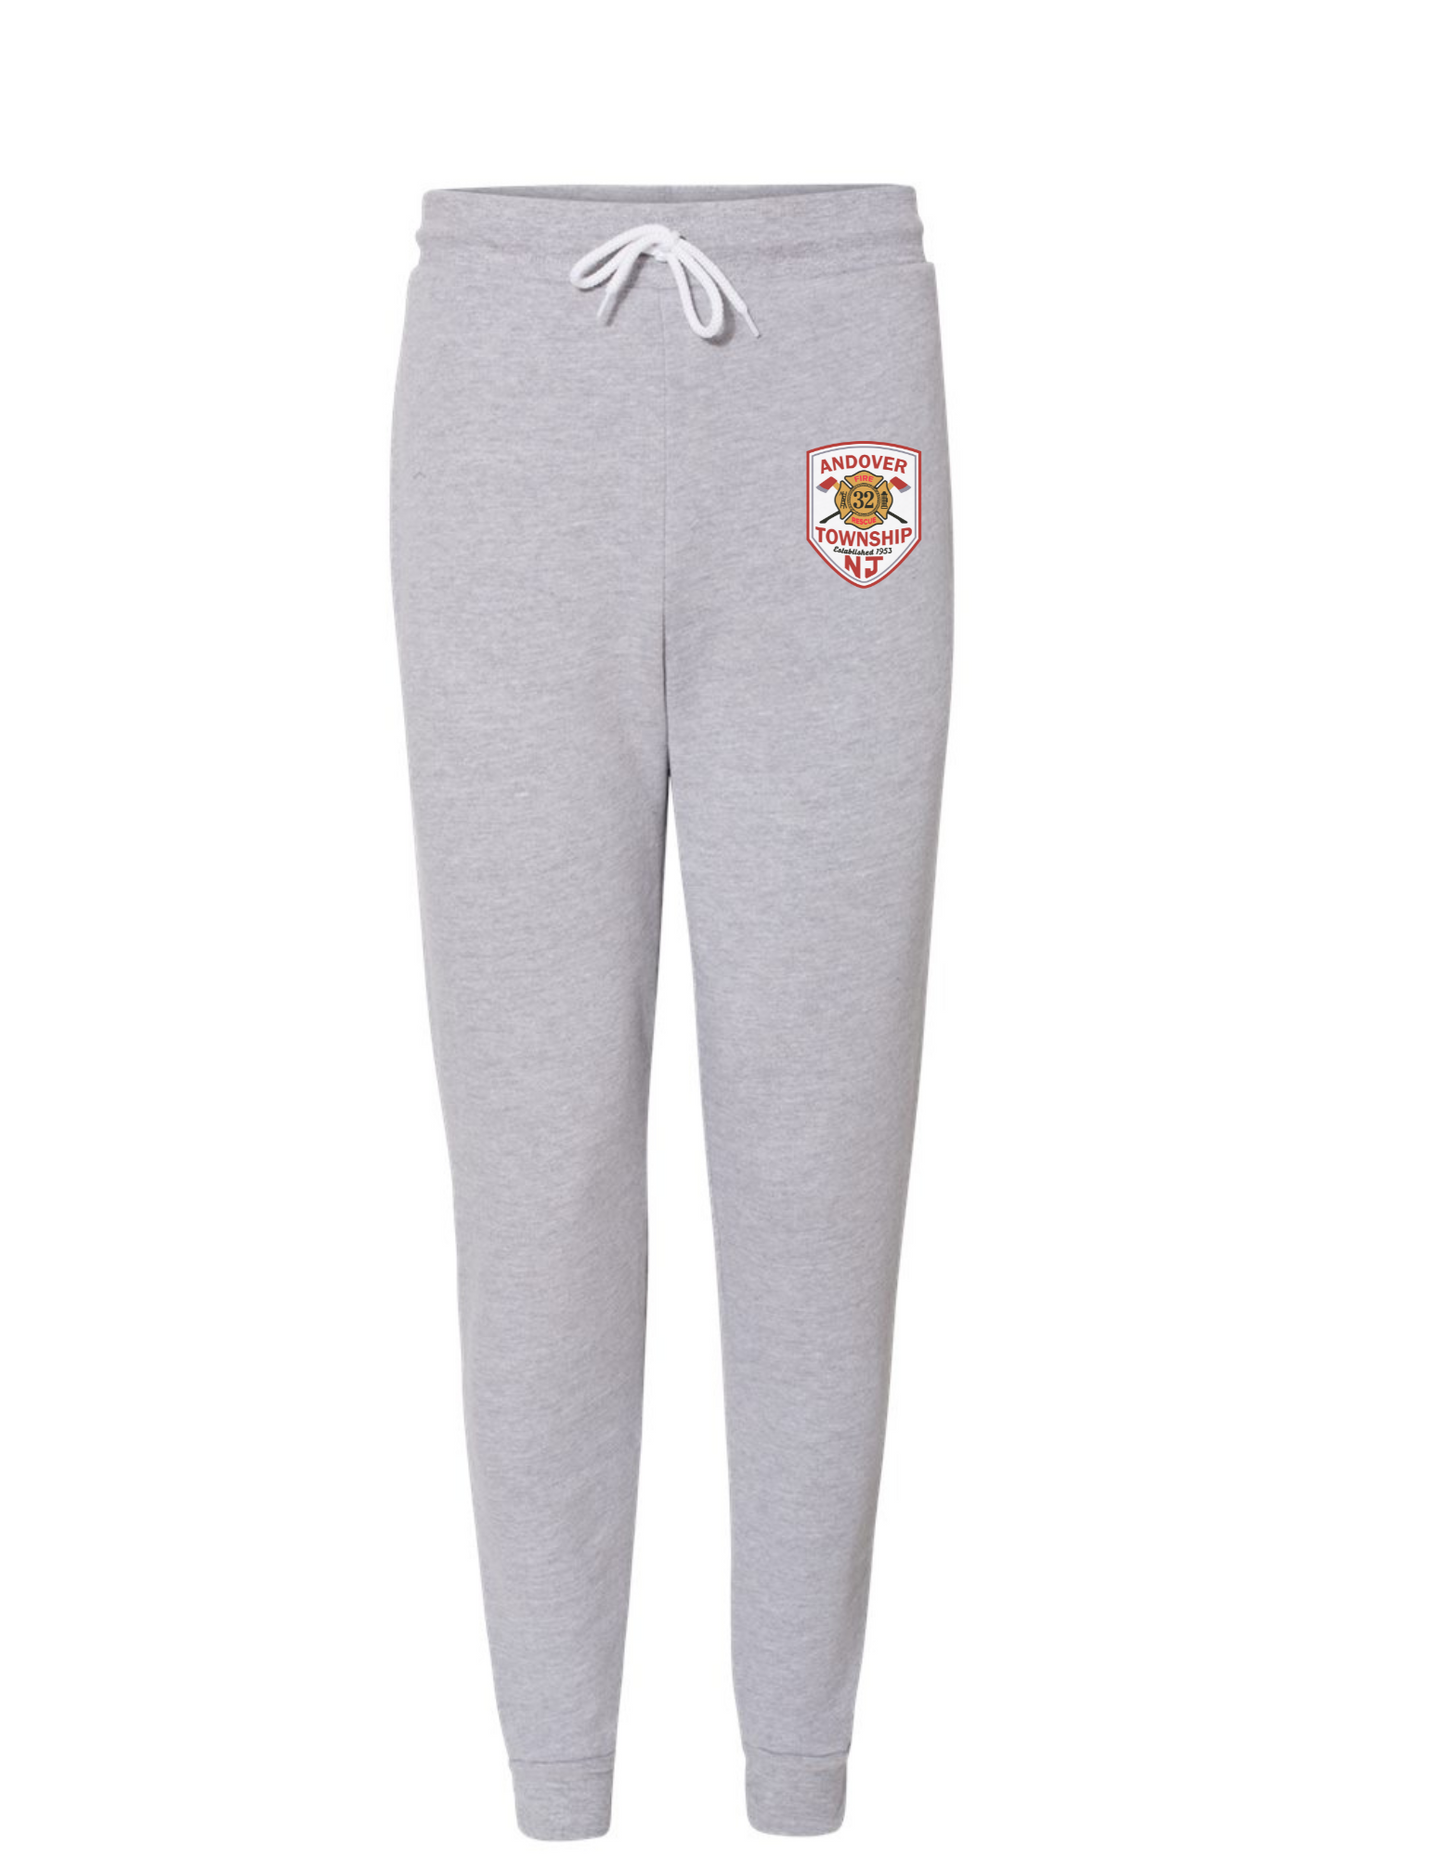 Ladies Township Fire Fleece Sweatpants With Pockets